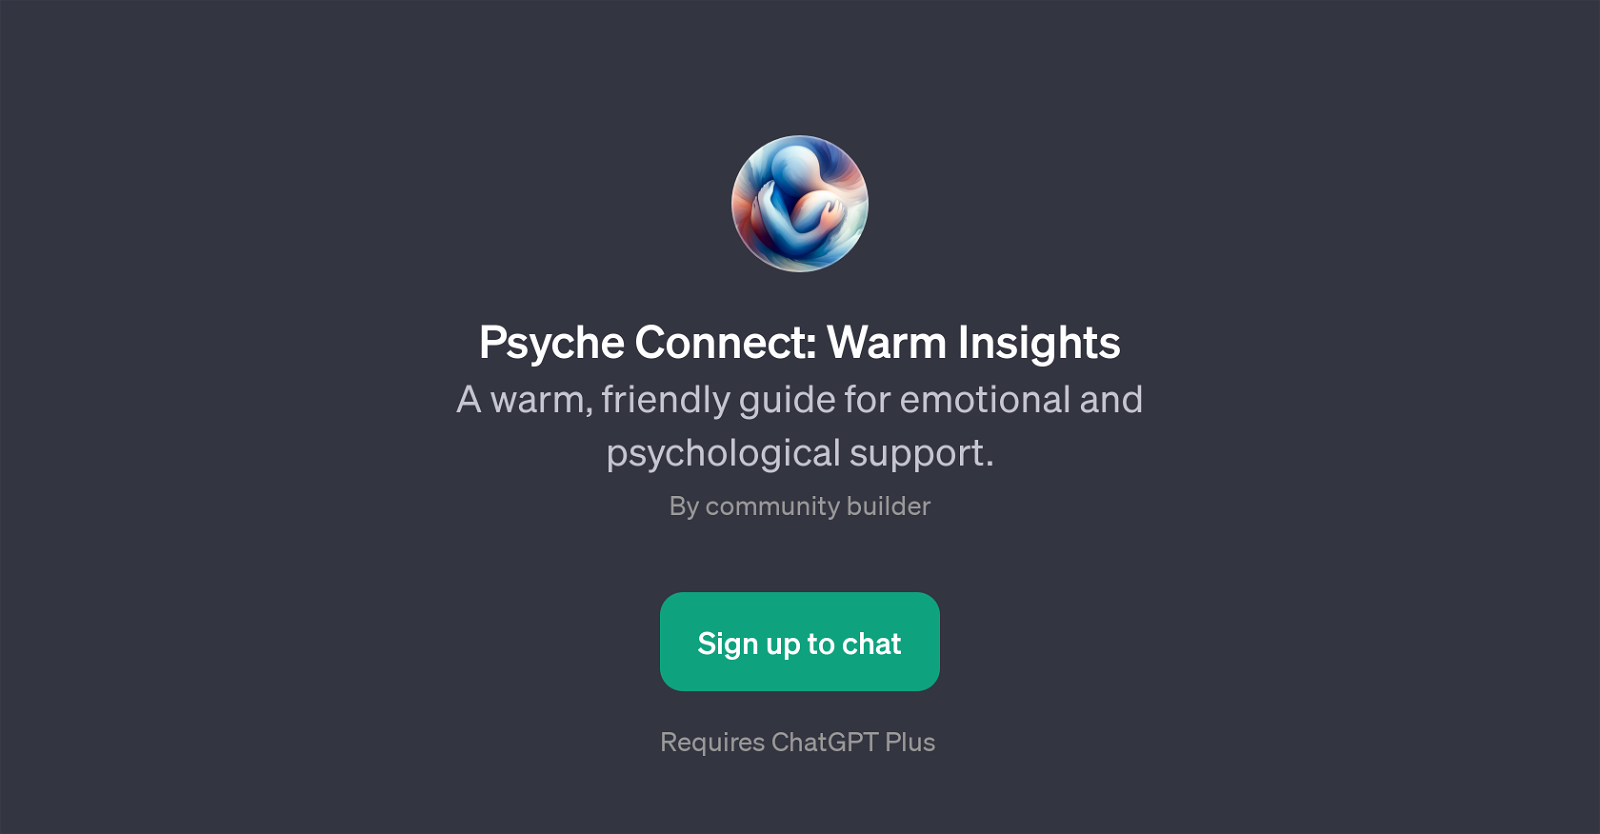 Psyche Connect: Warm Insights website